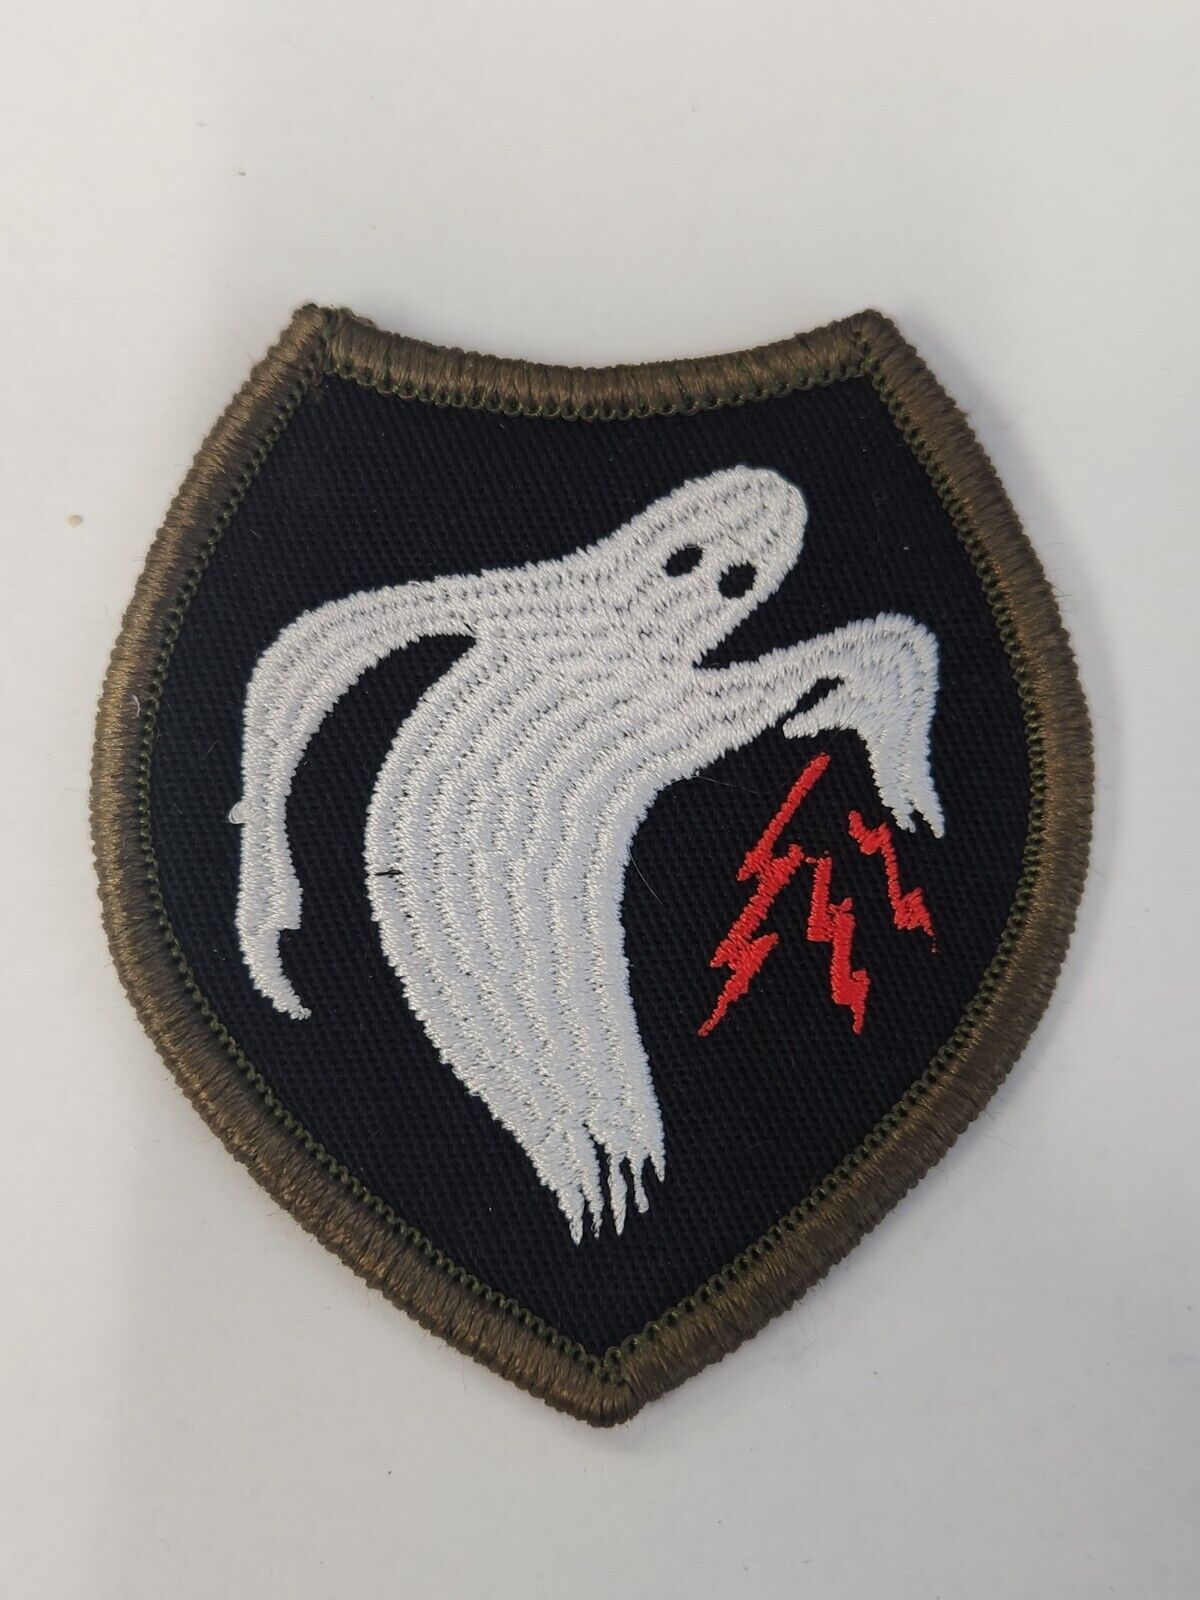 wwii army ghost unit patch currently made special forces